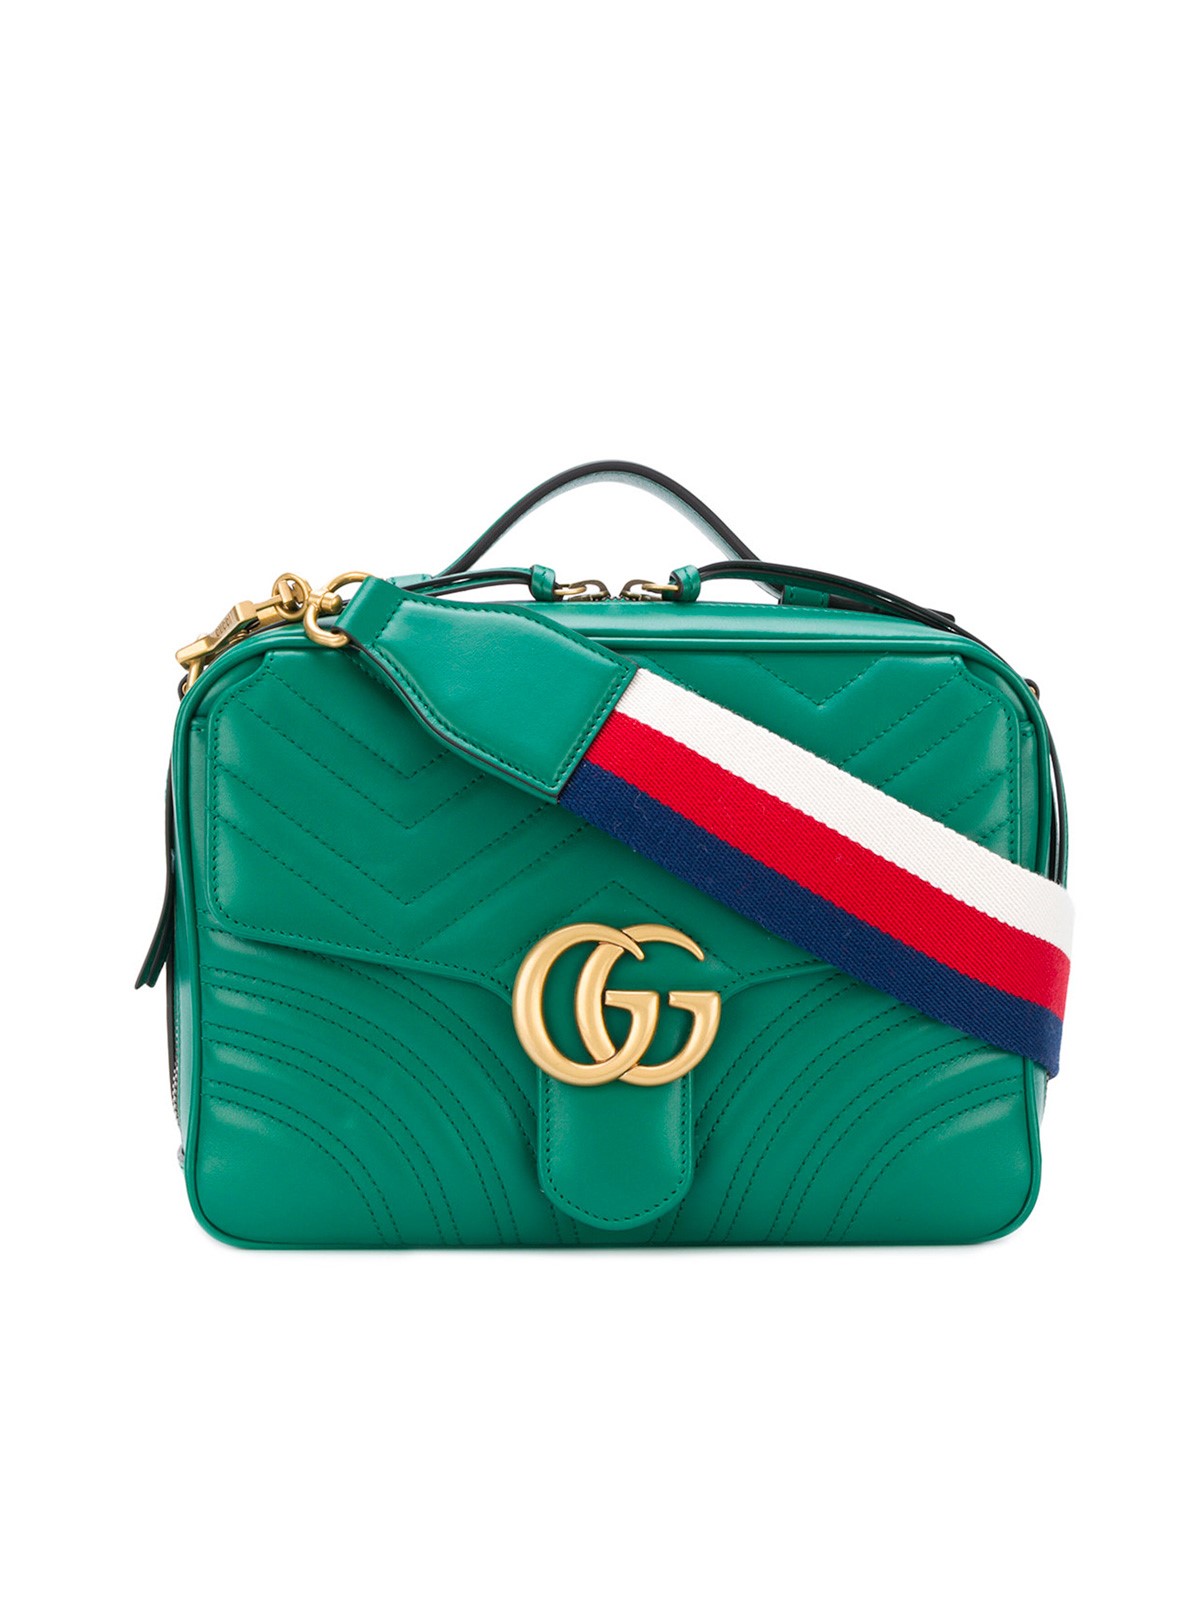 gucci GG MARMONT SHOULDER BAG available on www.semadata.org - 21477